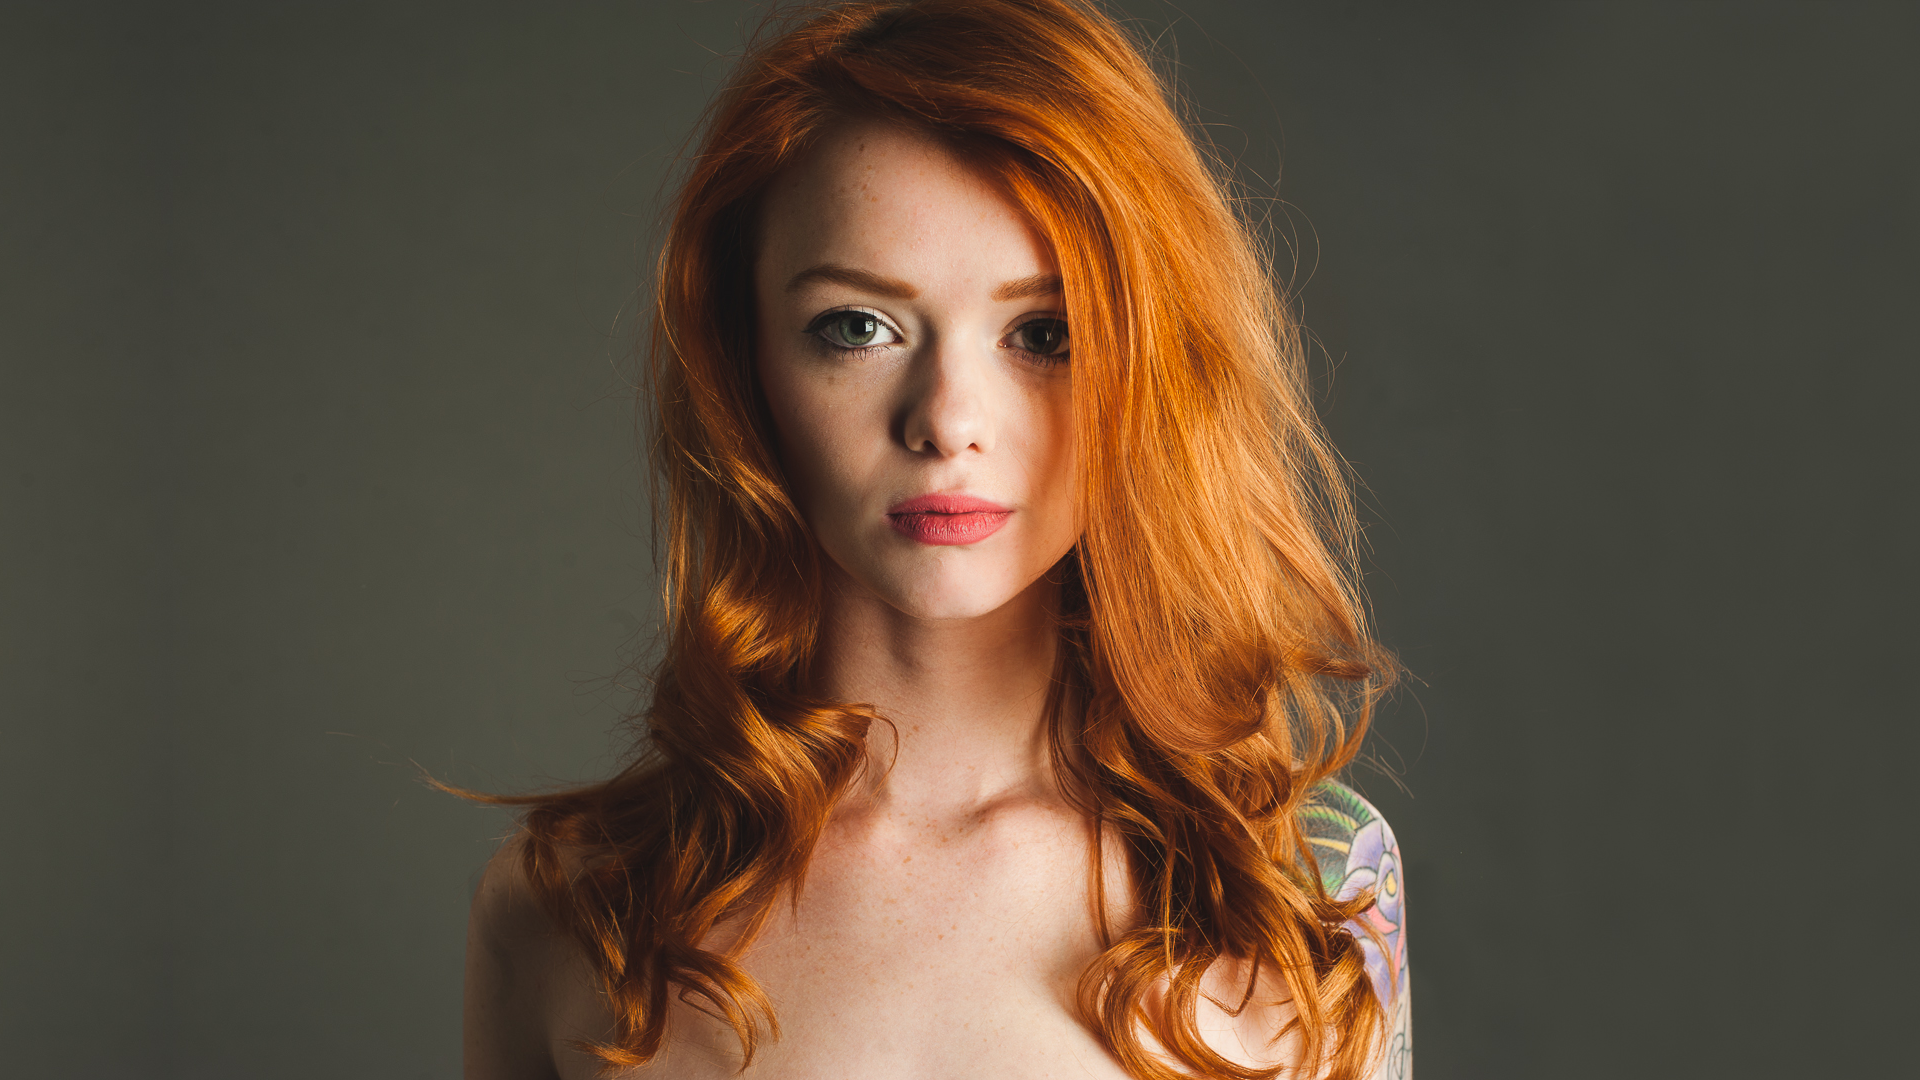 Wallpaper The red-haired model Julie Kennedy.